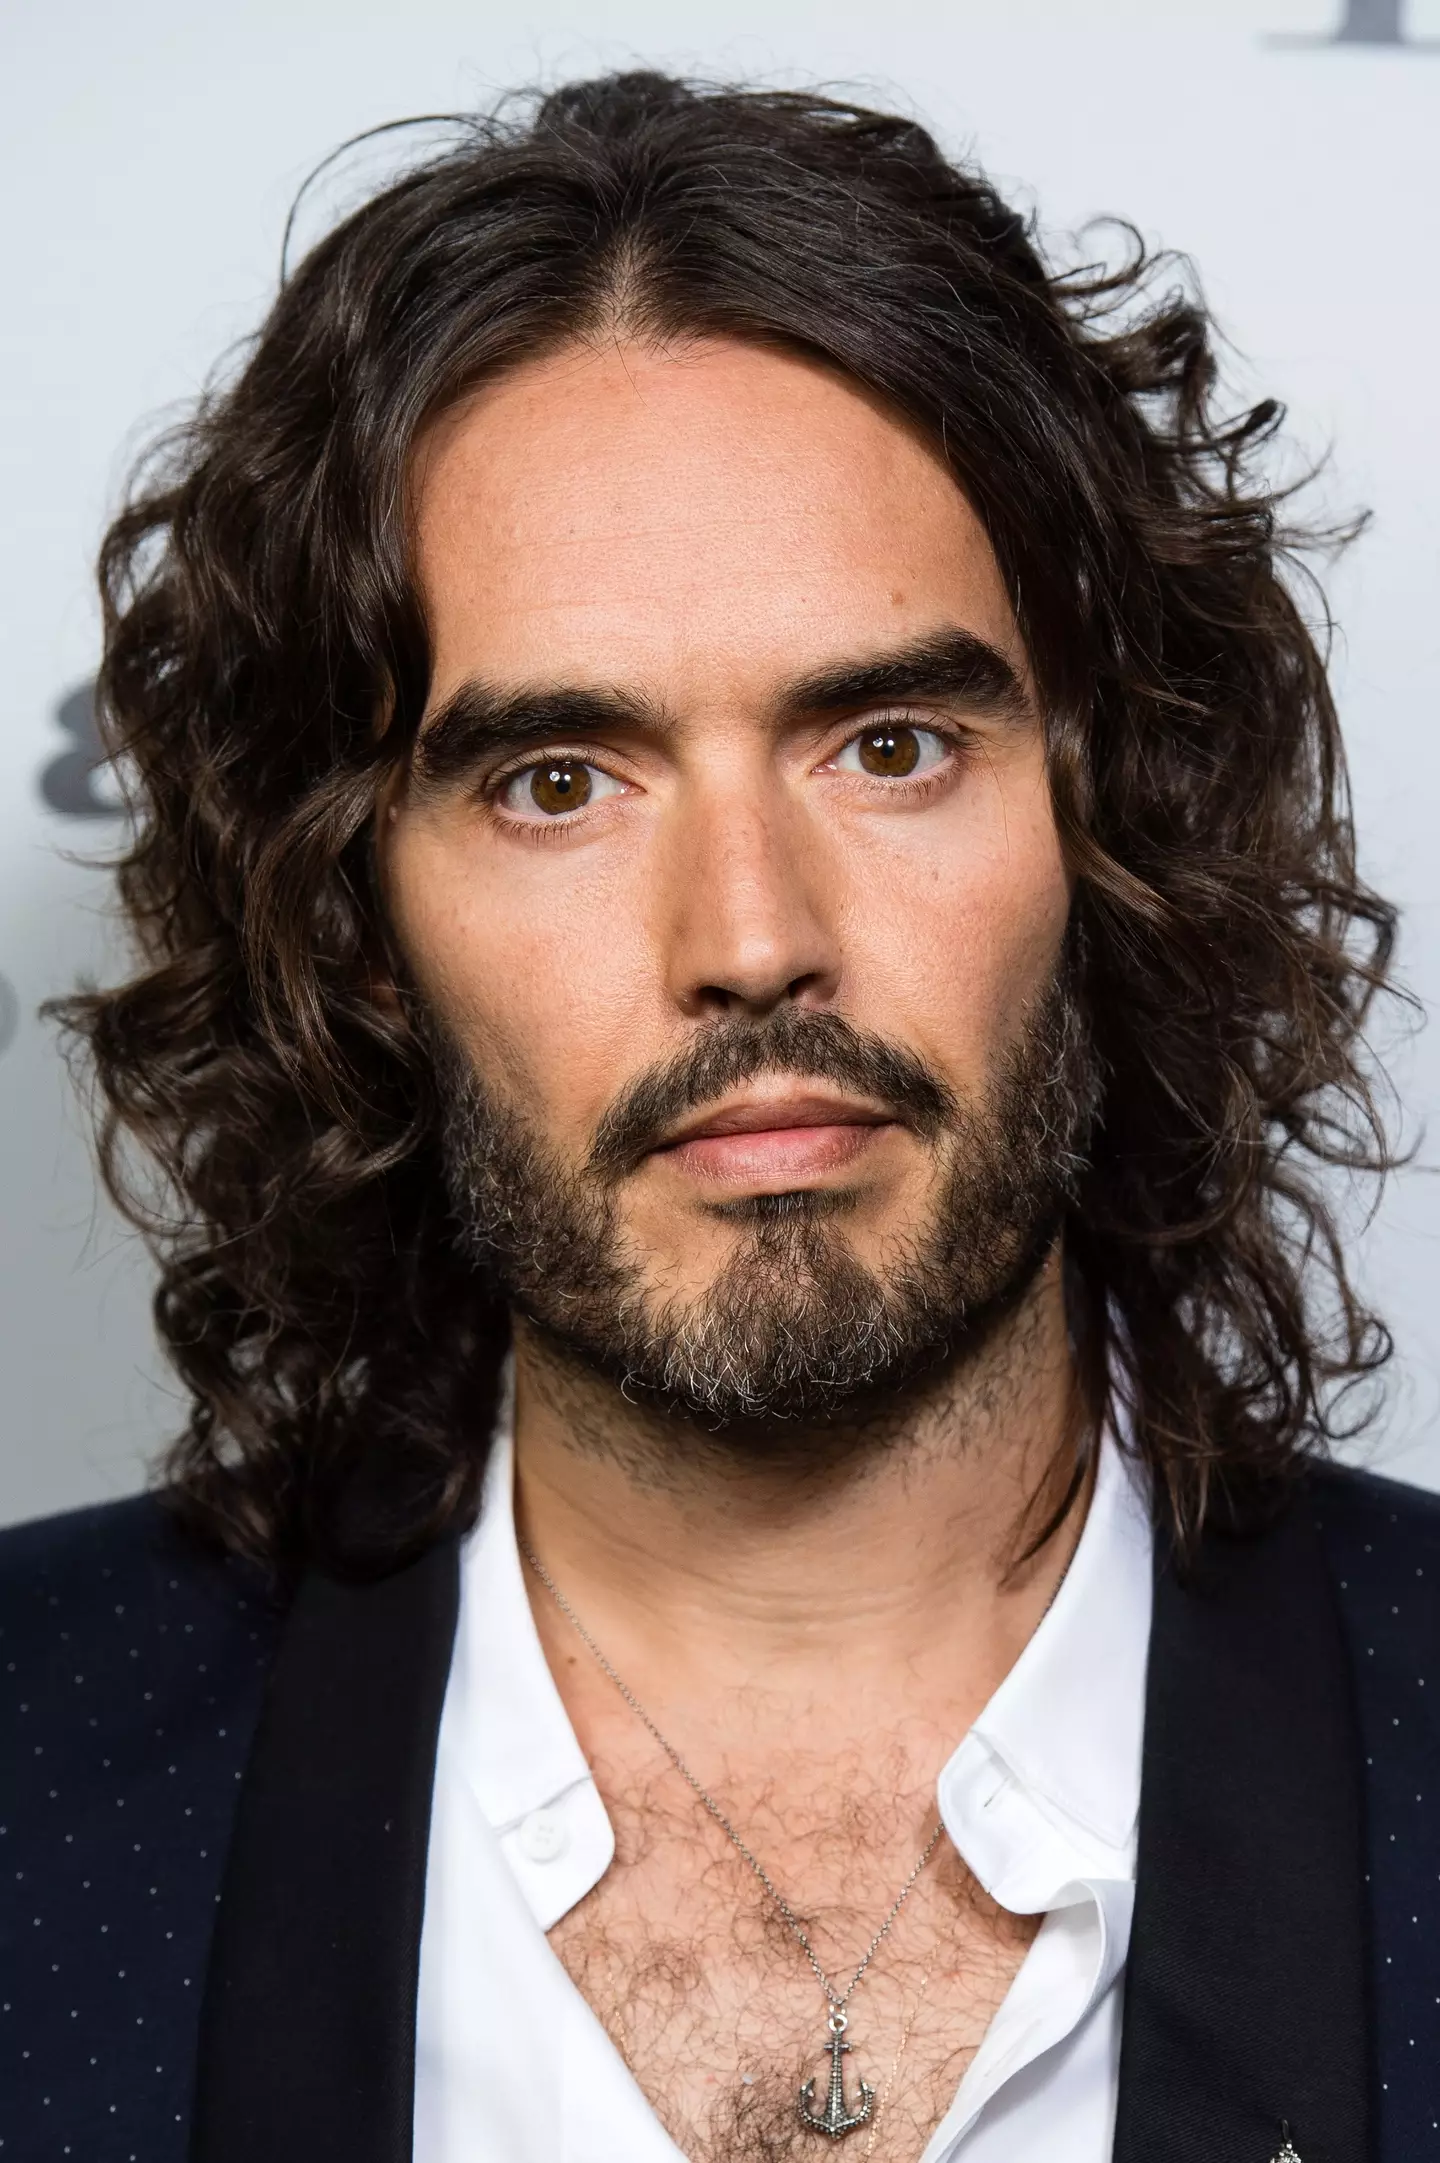 Youtube has 'suspended monetisation' on Russell Brand's YouTube channel following sexual assault allegations.